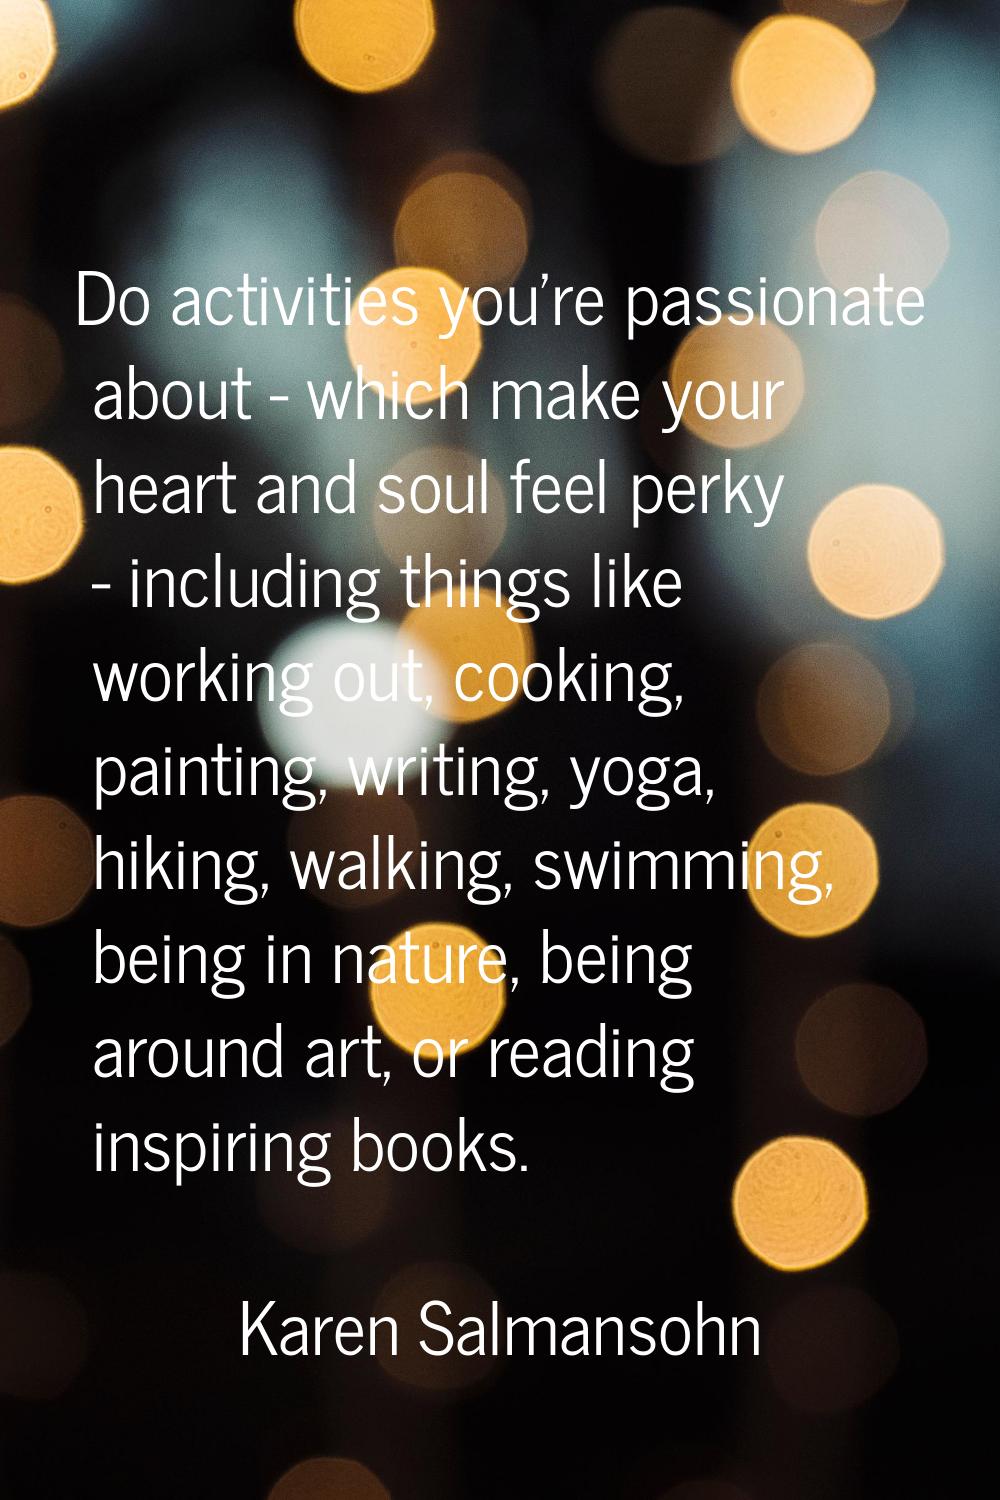 Do activities you're passionate about - which make your heart and soul feel perky - including thing